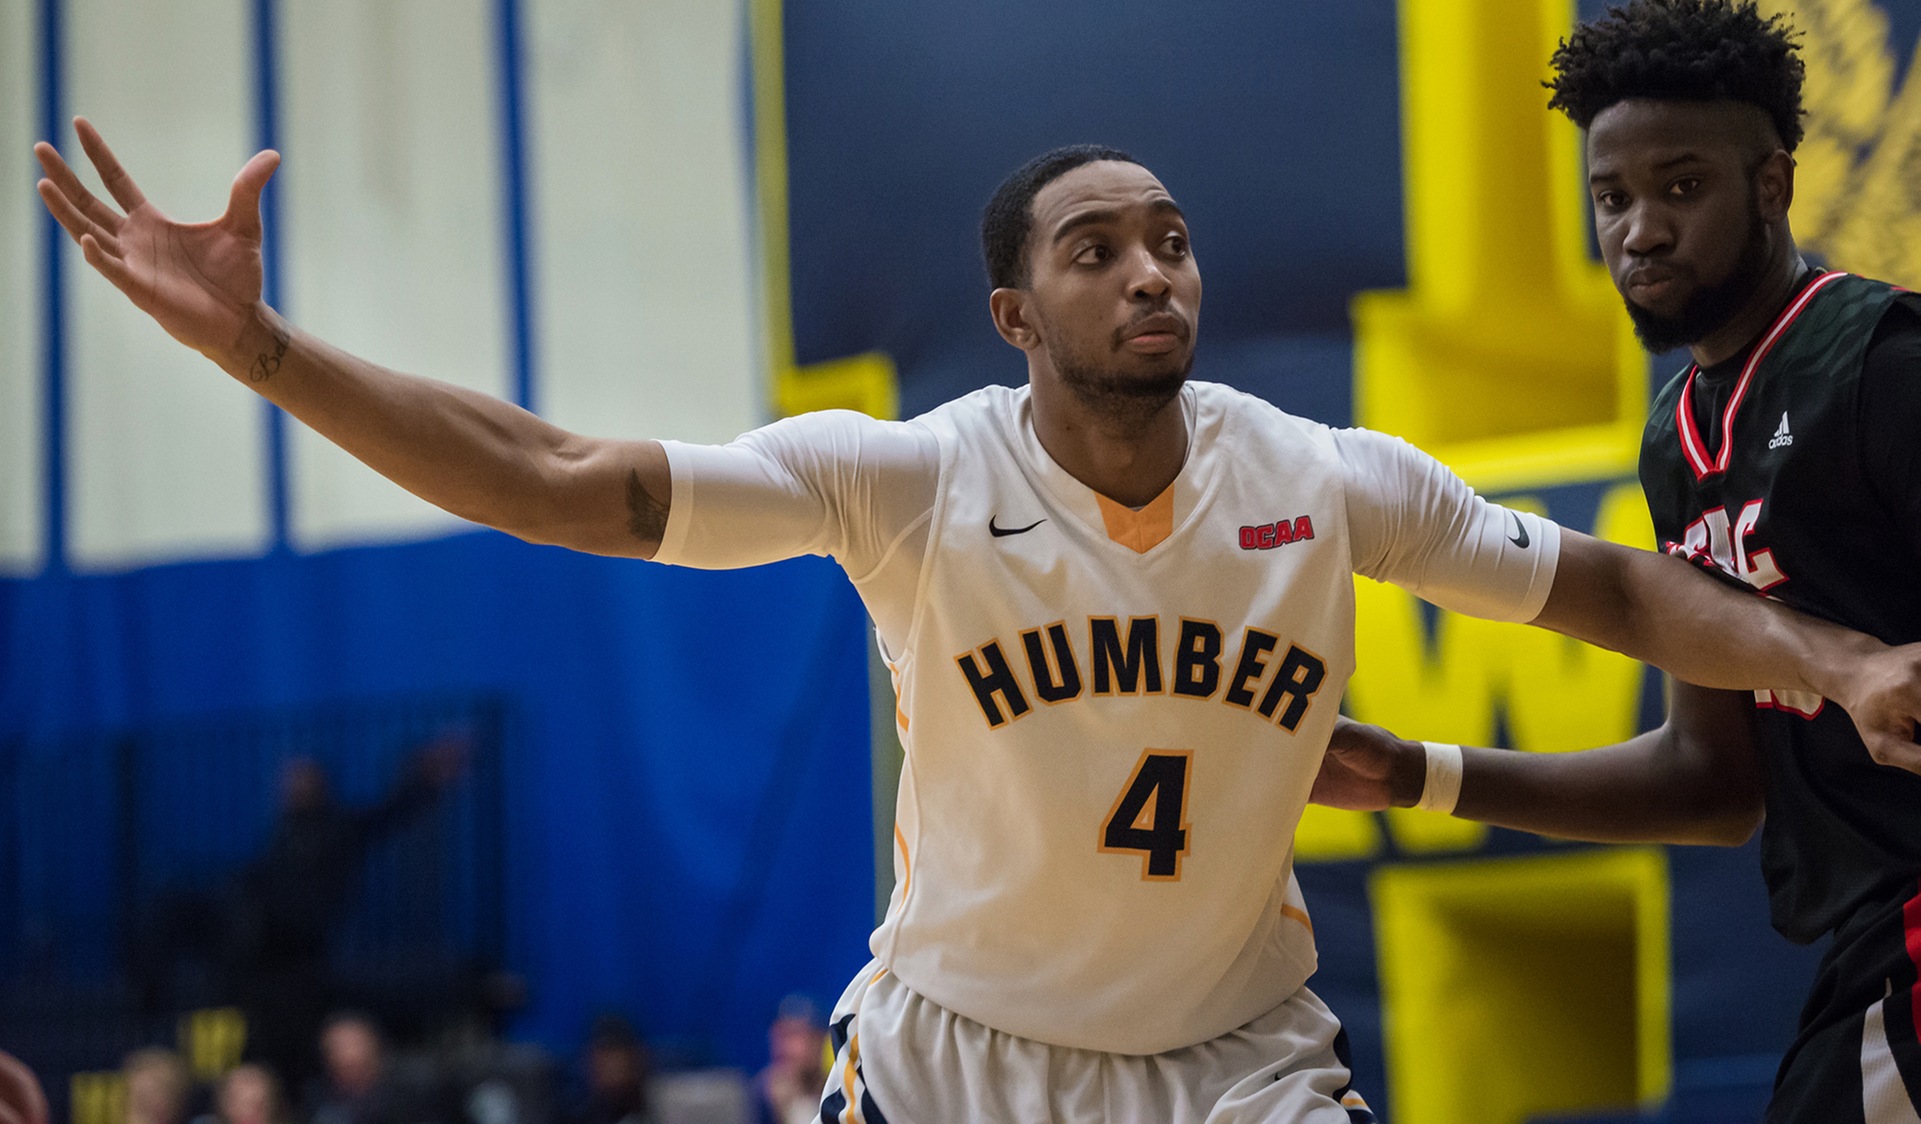 MEN’S BASKETBALL BACK ON HOME COURT TUESDAY FOR FRIENDLY VS U OF GUELPH